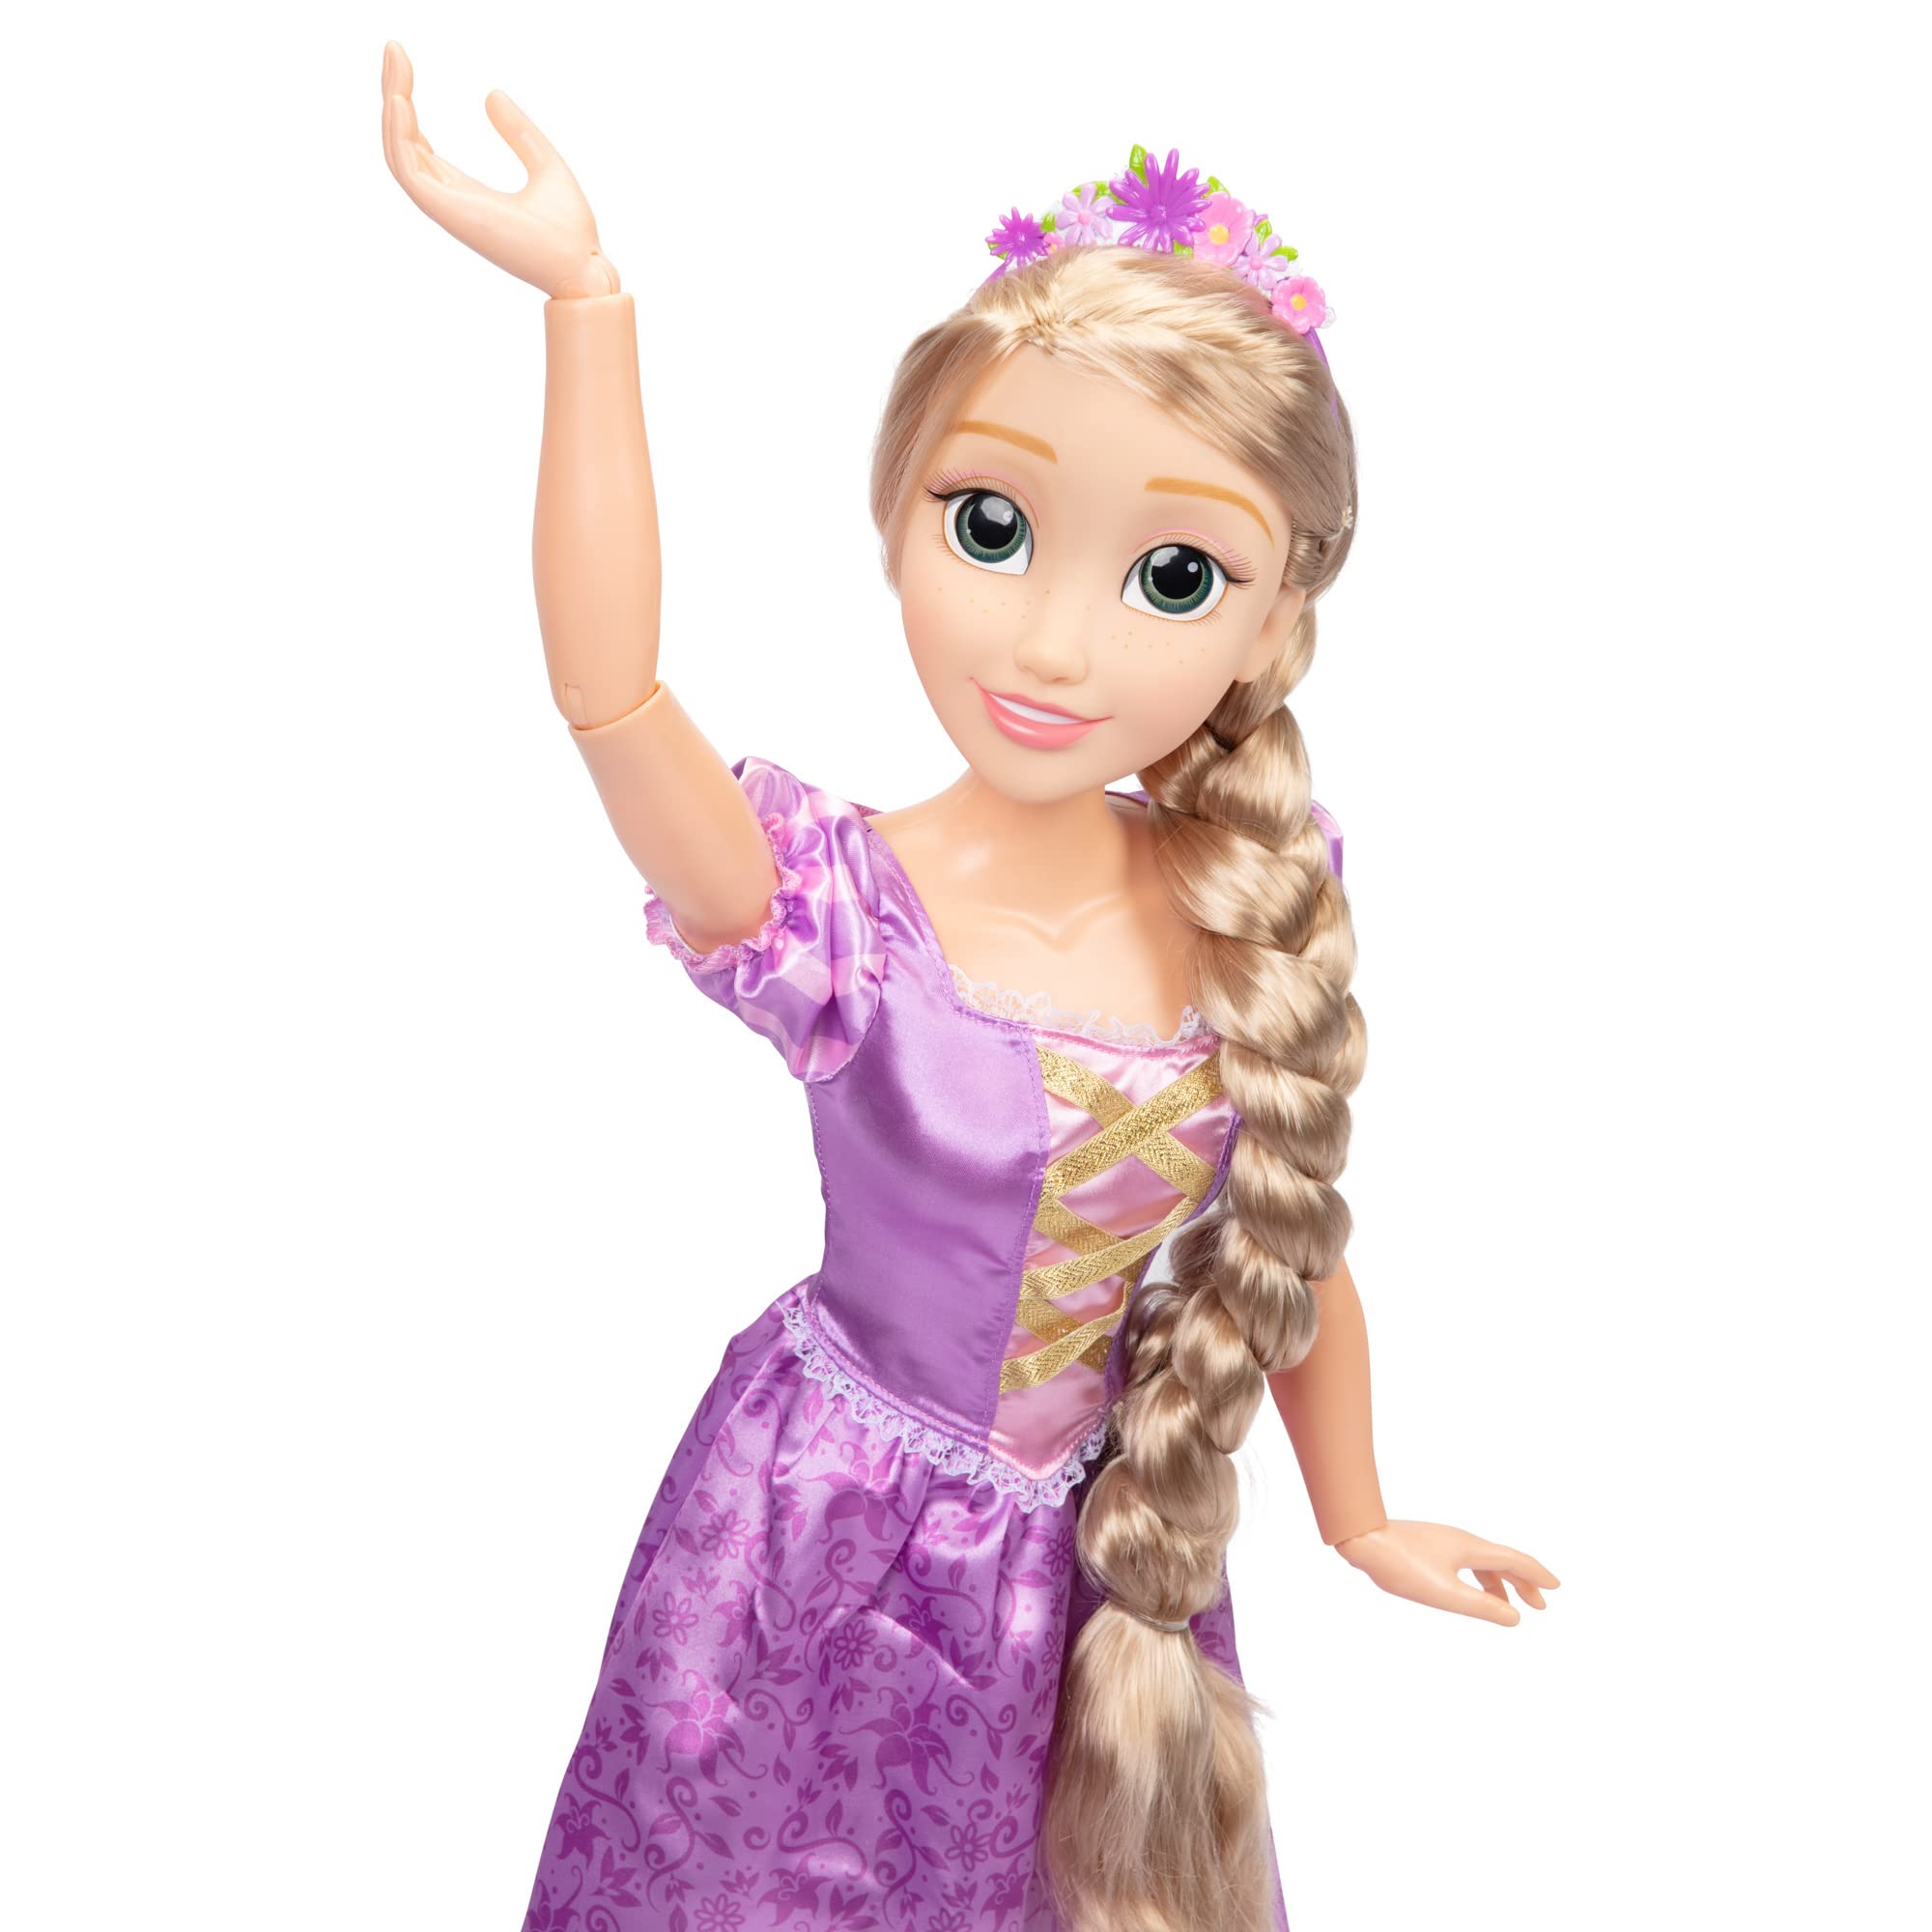 Disney Princess Rapunzel Doll Playdate 32” Tall & Poseable, My Size Articulated Doll in Purple Dress, Comes with Brush to Comb Her Long Golden Hair, Flower Garland Hairband & Hair Pins